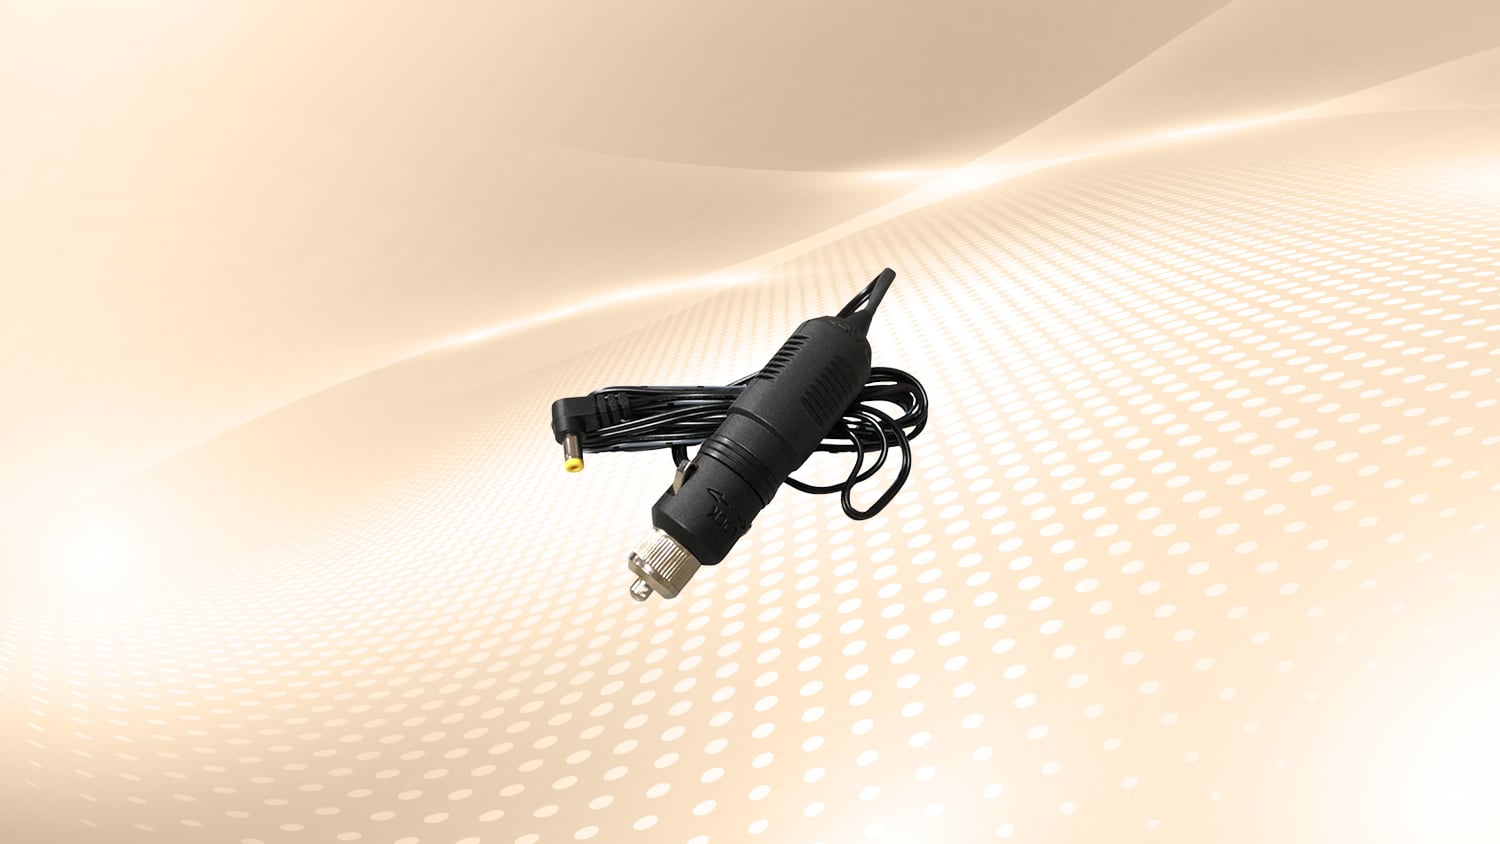 Car charger (12 vehicle power supply) Eos Arrow GPS GIS GNSS